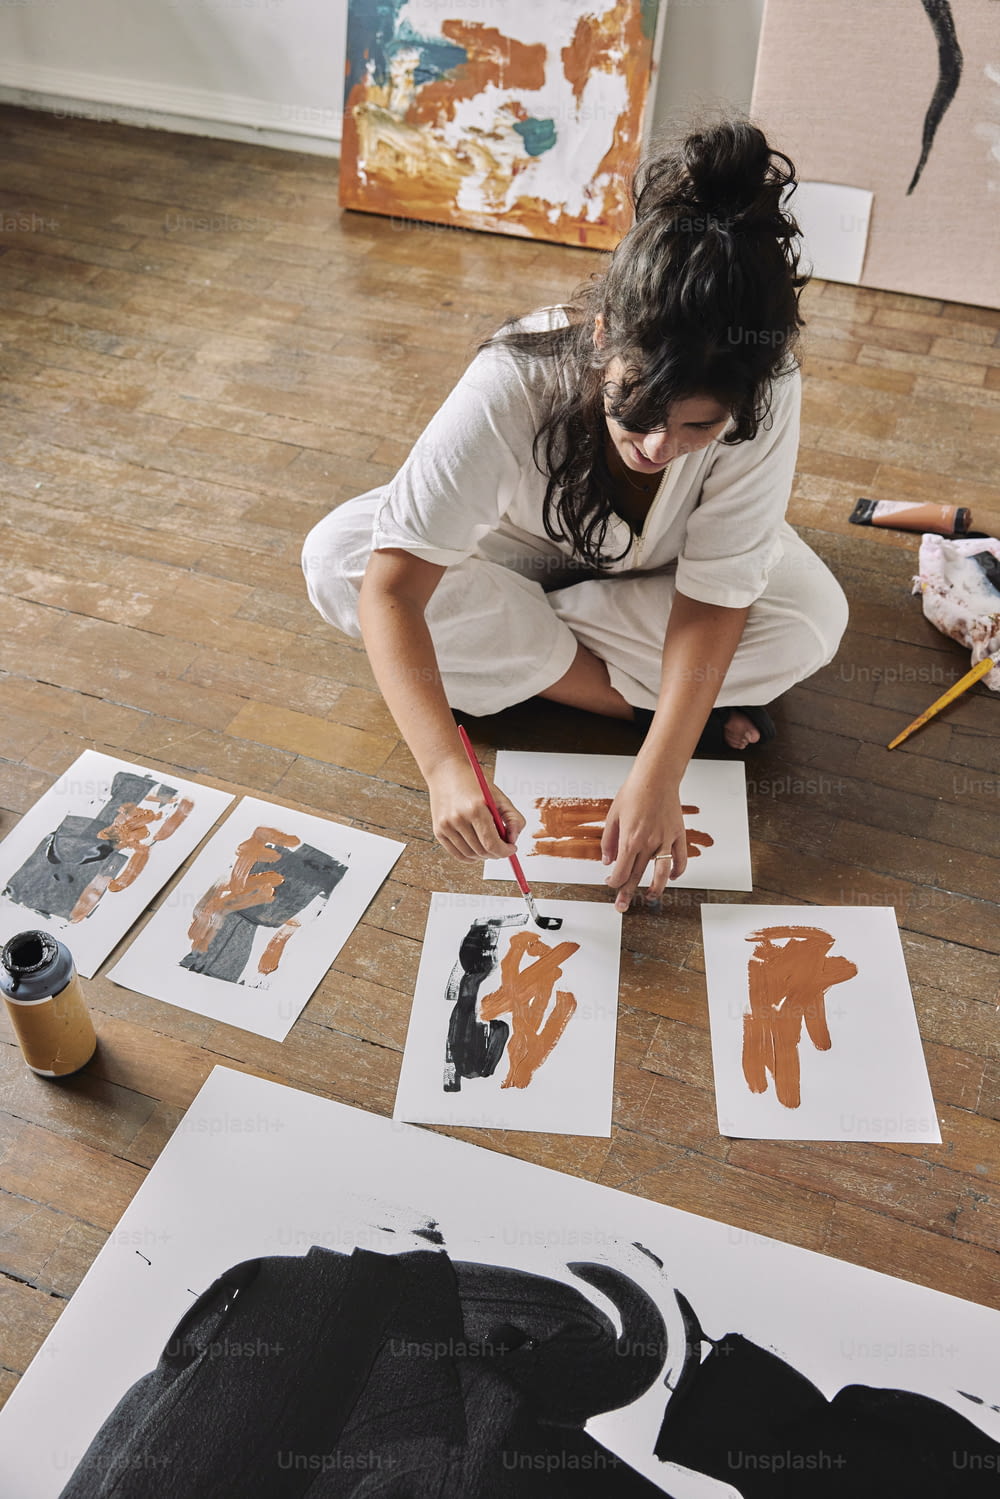 a woman sitting on the floor working on some artwork